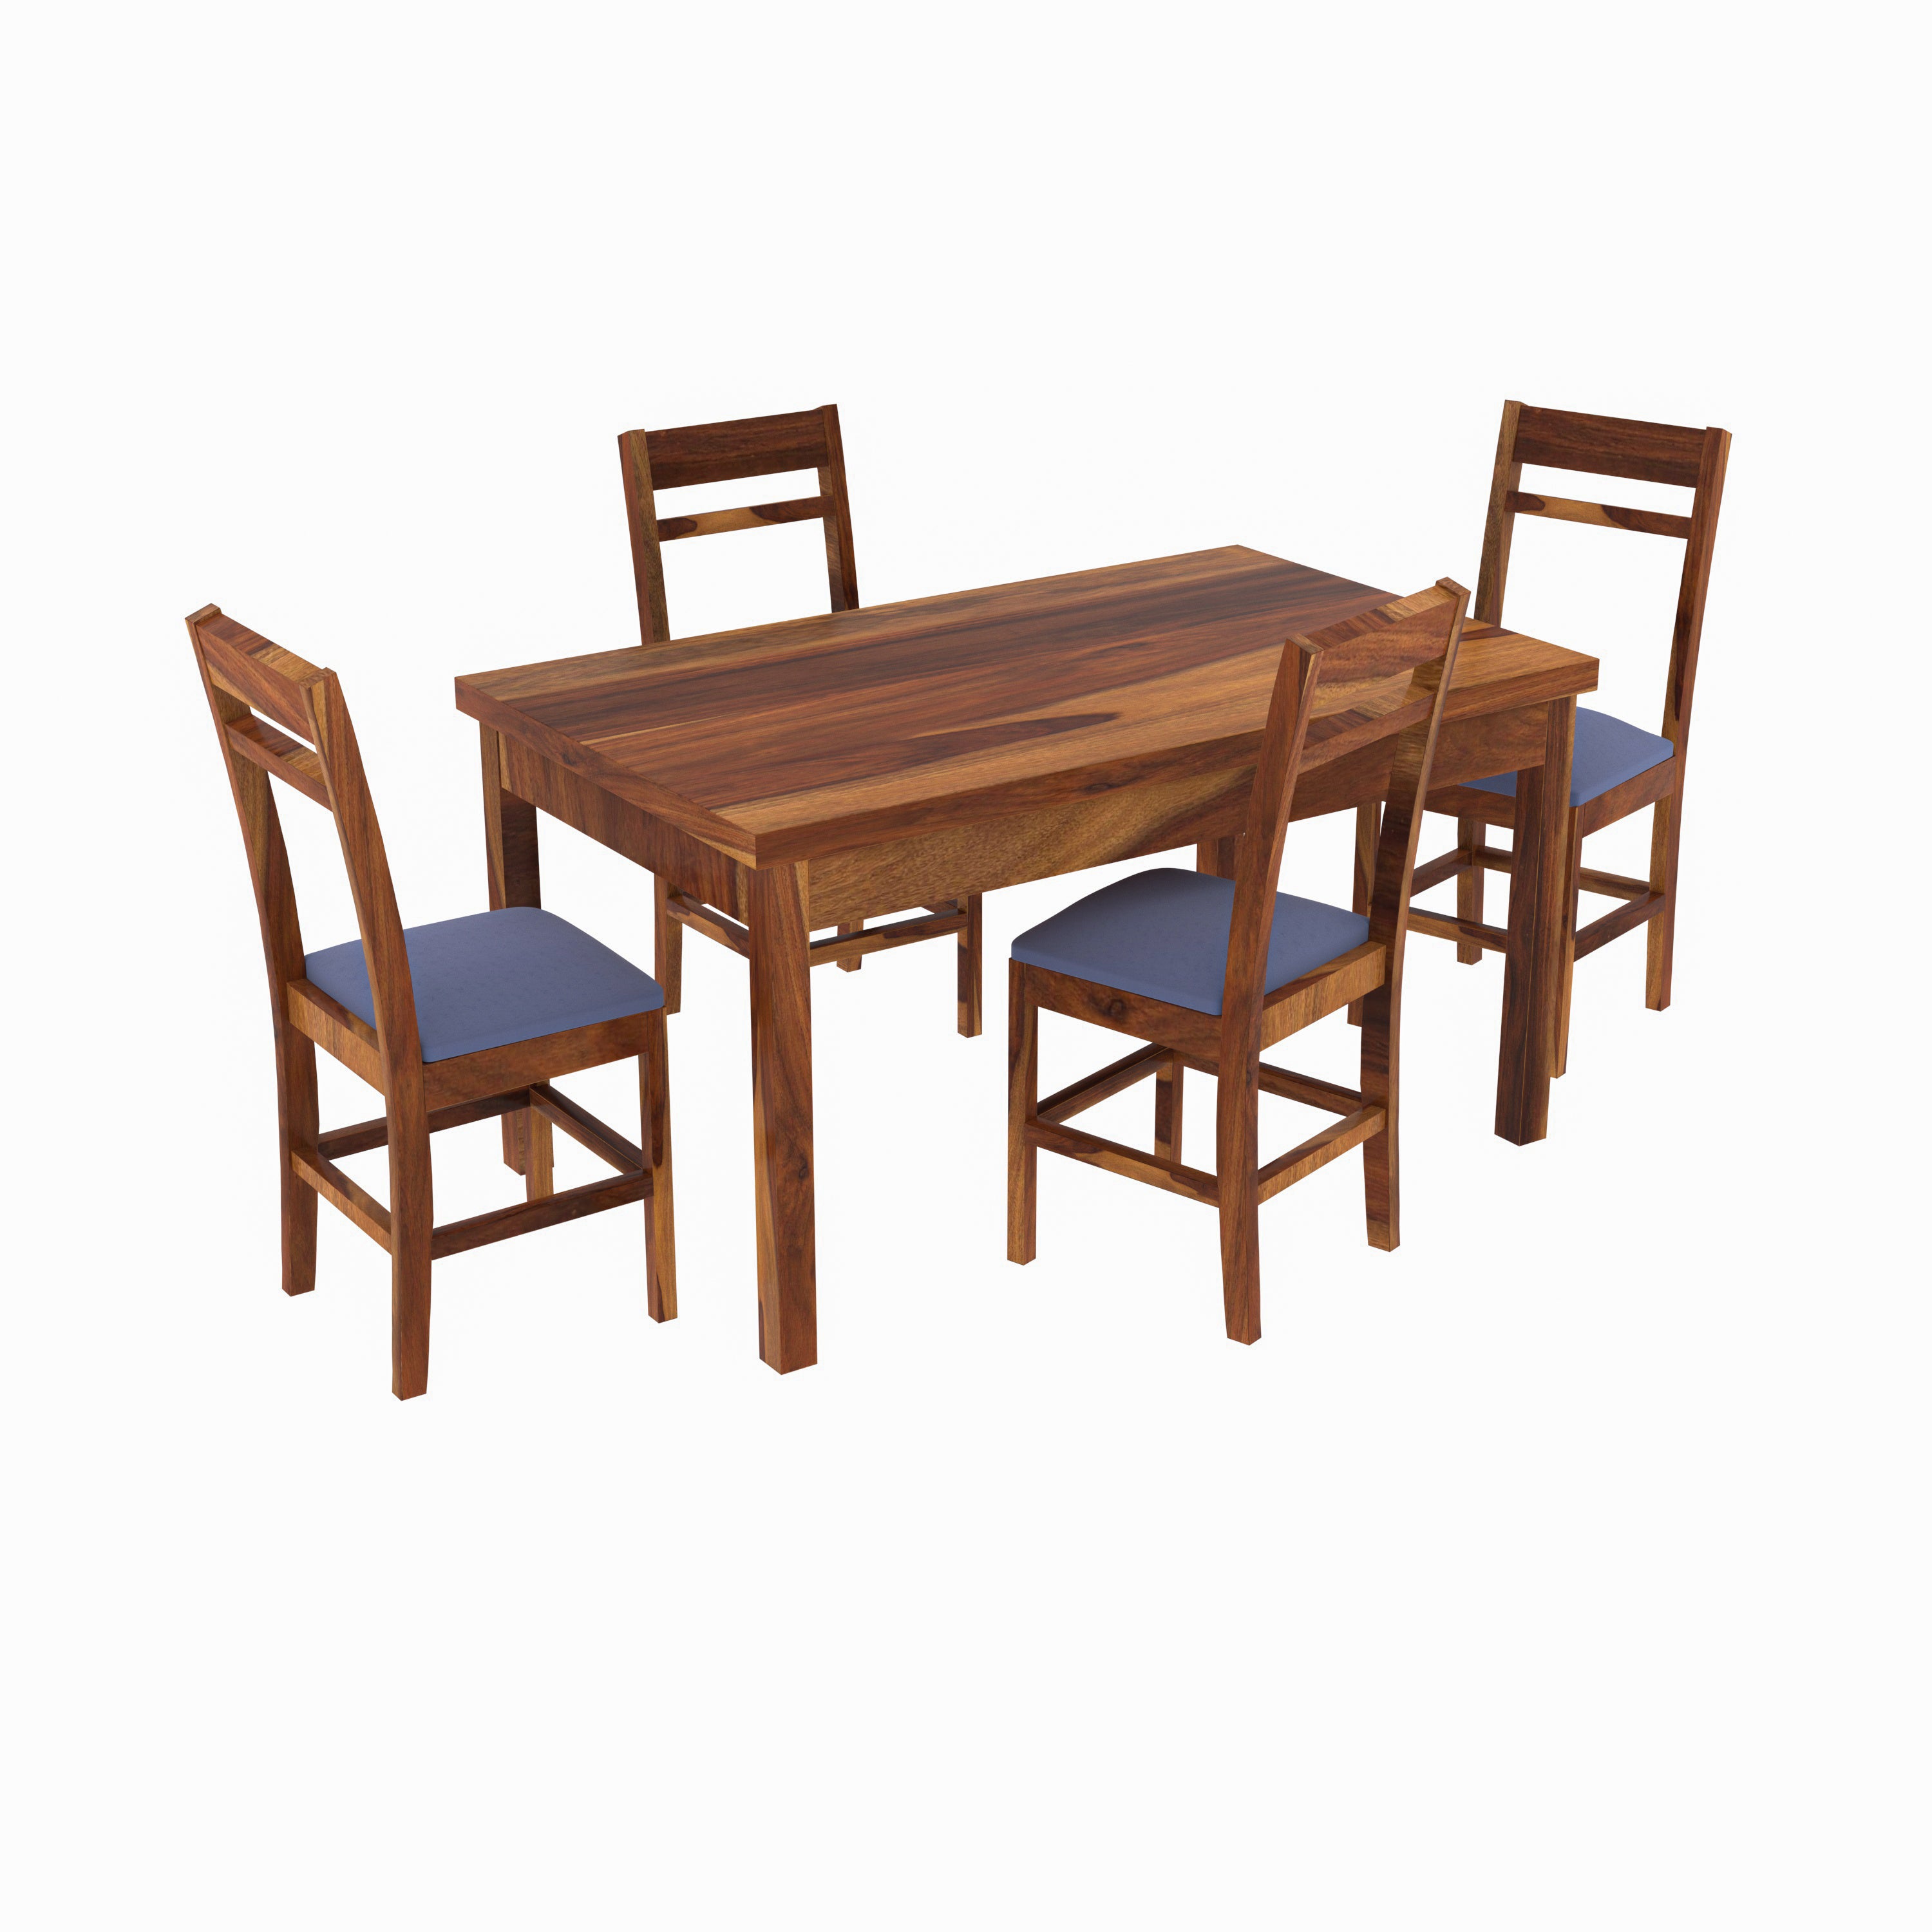 Artistic Clever Finish Classic Wooden Dinning Table Set Dining Set